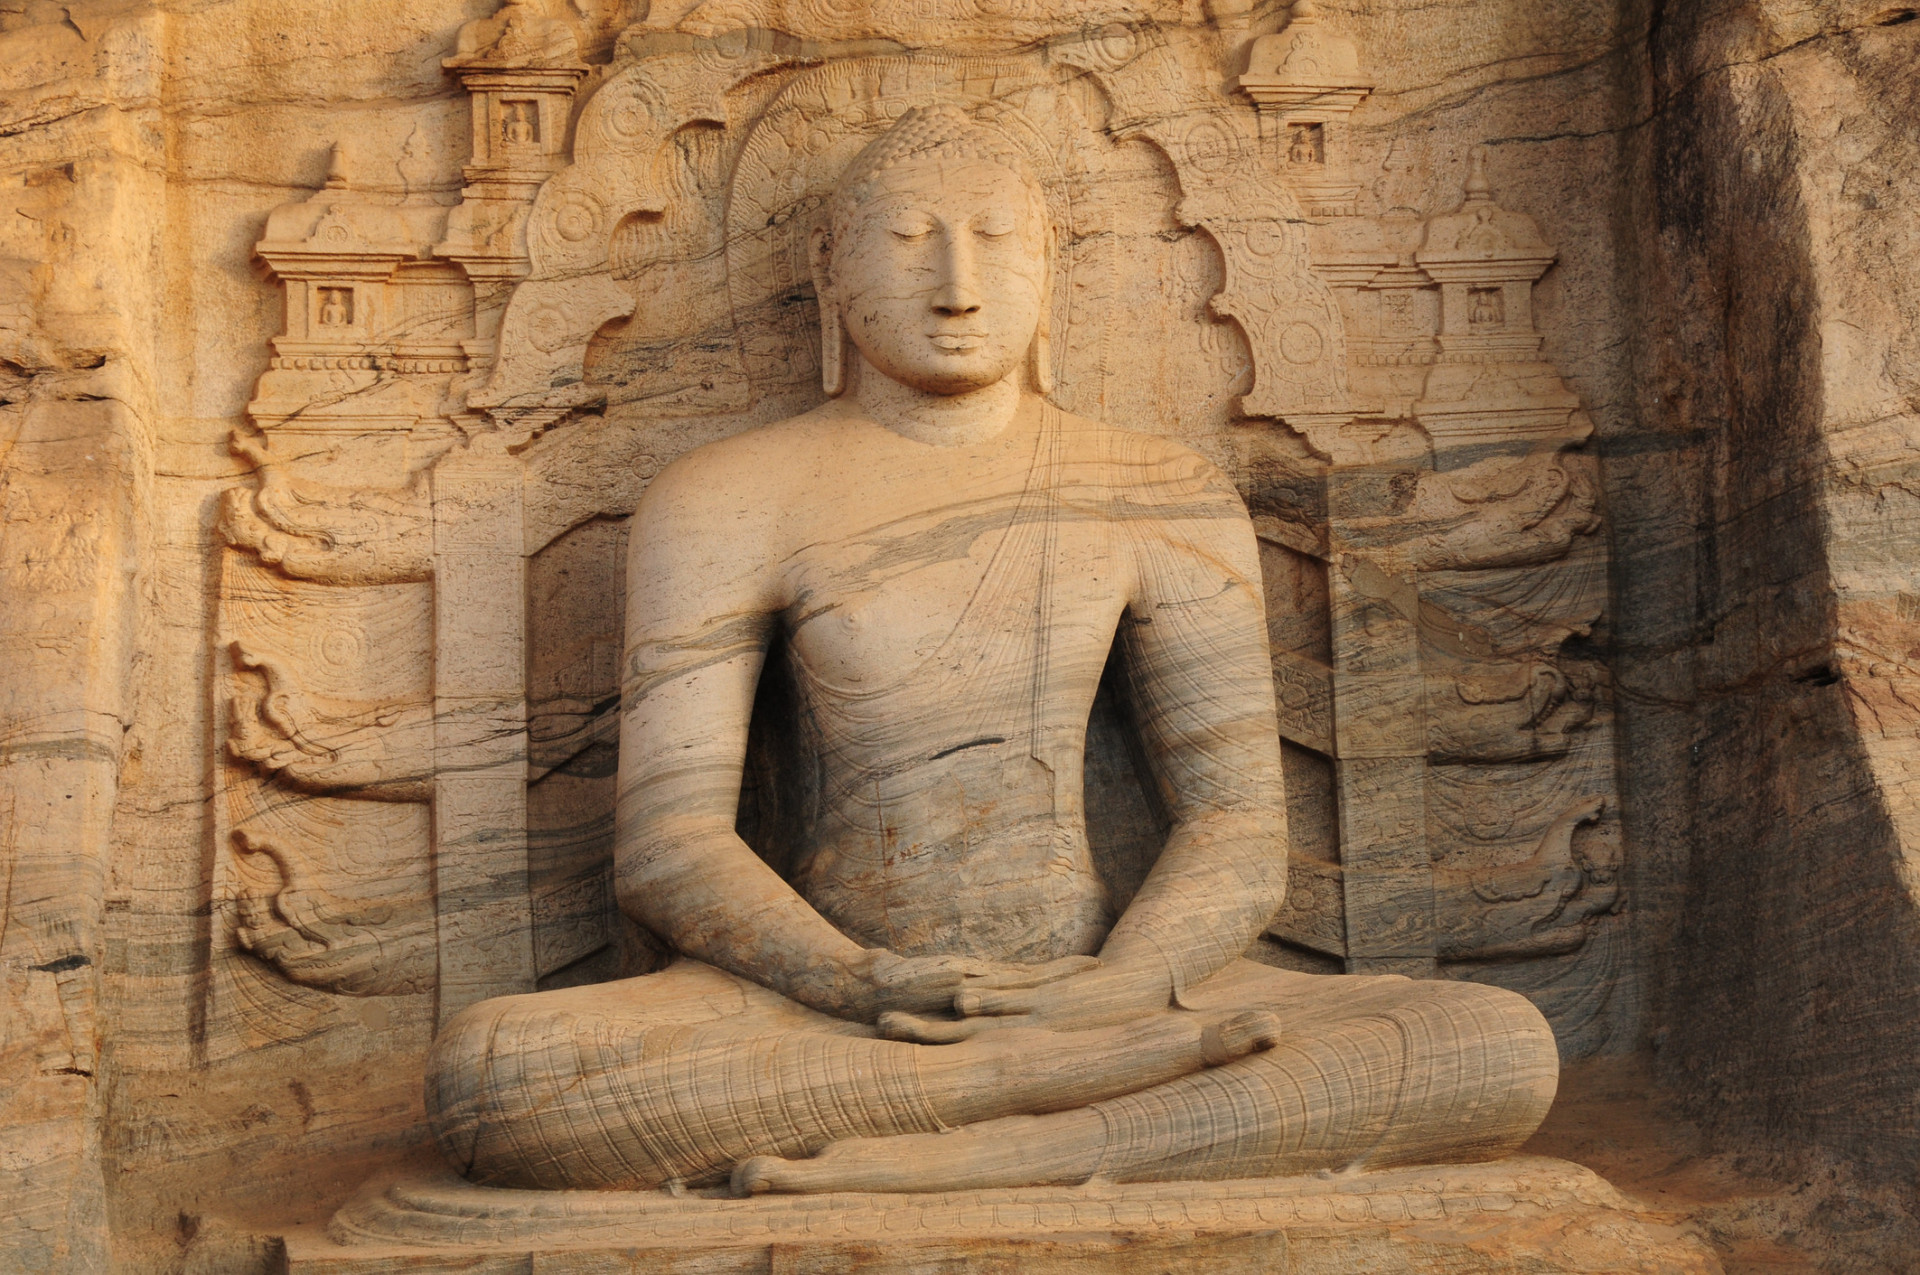 A large seated Buddha at the Gal Vihara rock temple. The statues are regarded as some of the finest examples of ancient Sinhalese sculpting and carving arts.<p><a href="https://www.msn.com/en-us/community/channel/vid-7xx8mnucu55yw63we9va2gwr7uihbxwc68fxqp25x6tg4ftibpra?cvid=94631541bc0f4f89bfd59158d696ad7e">Follow us and access great exclusive content every day</a></p>